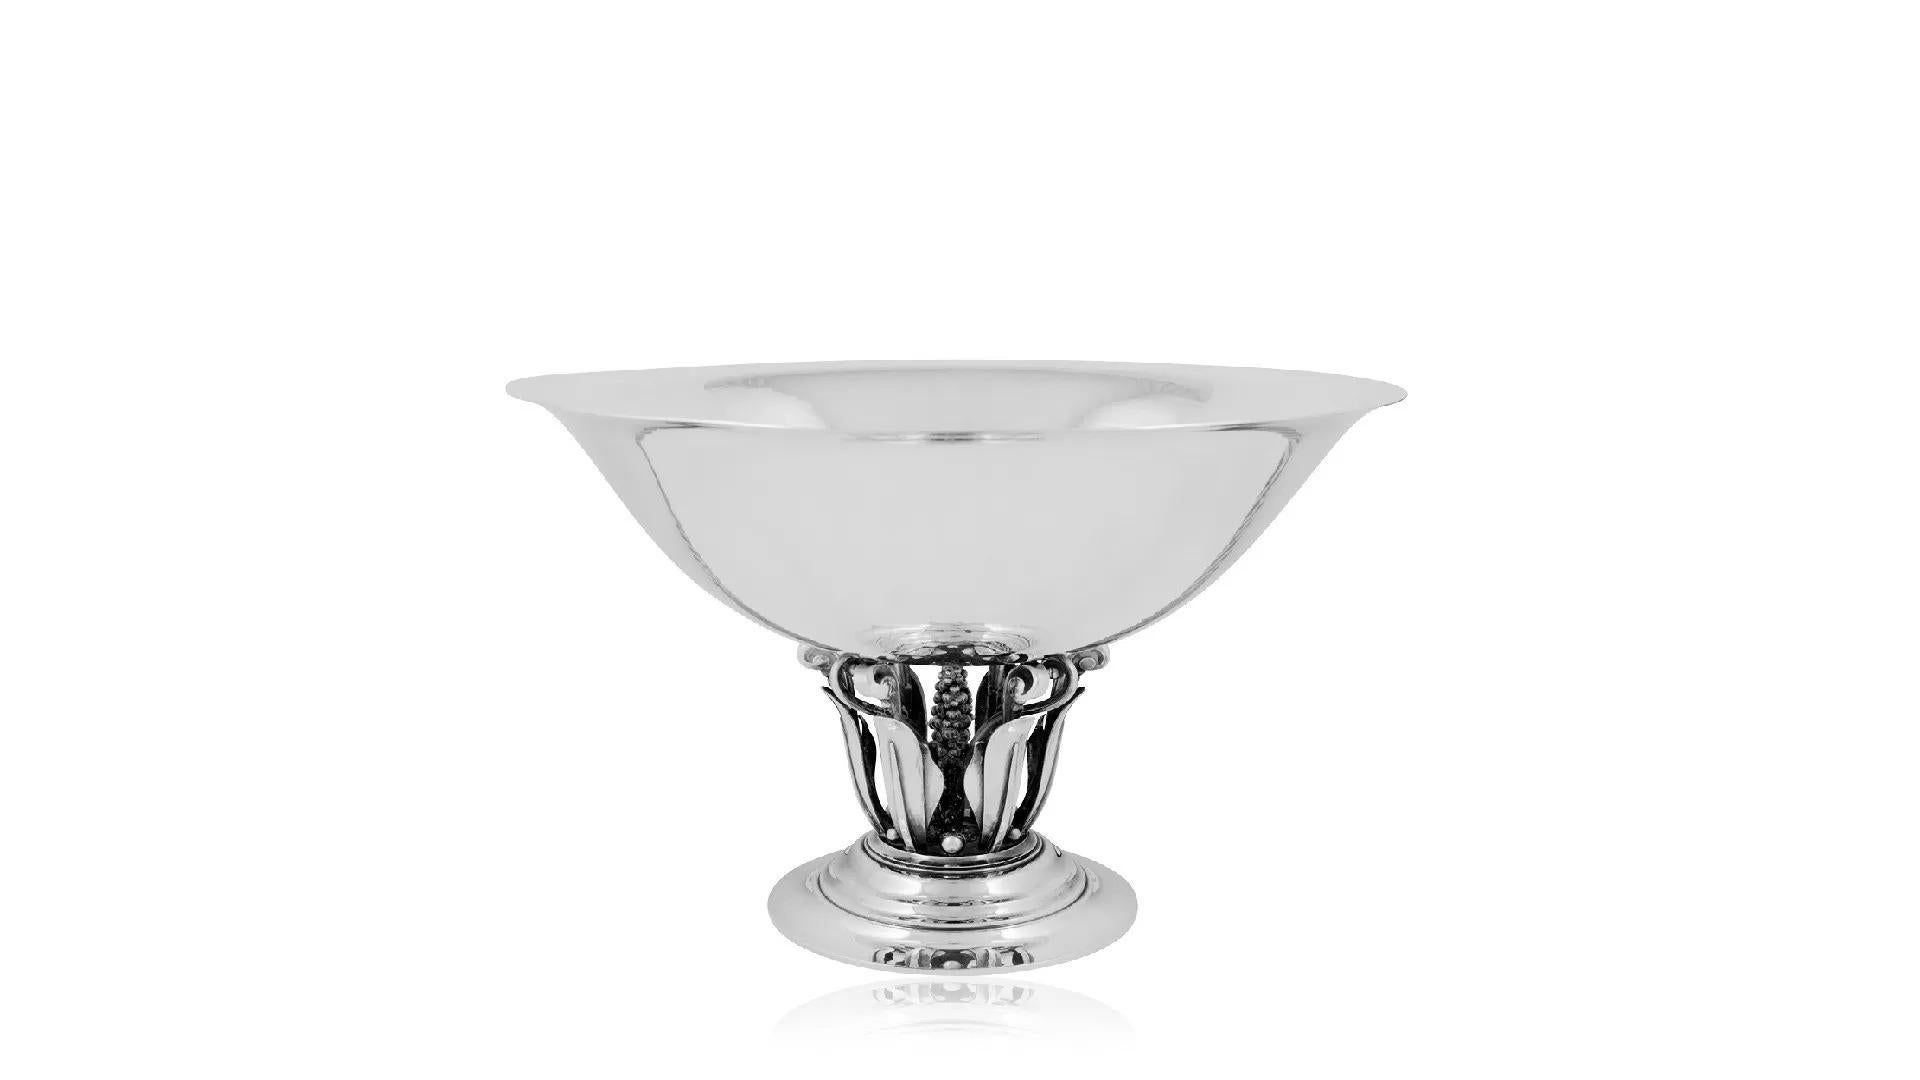 A sterling silver Georg Jensen bowl, featuring a pierced stem adorned with floral details and scrolls. It was designed by Johan Rohde in 1919, identified by design number #242. The bowl sits atop a round raised tiered base connected to a central